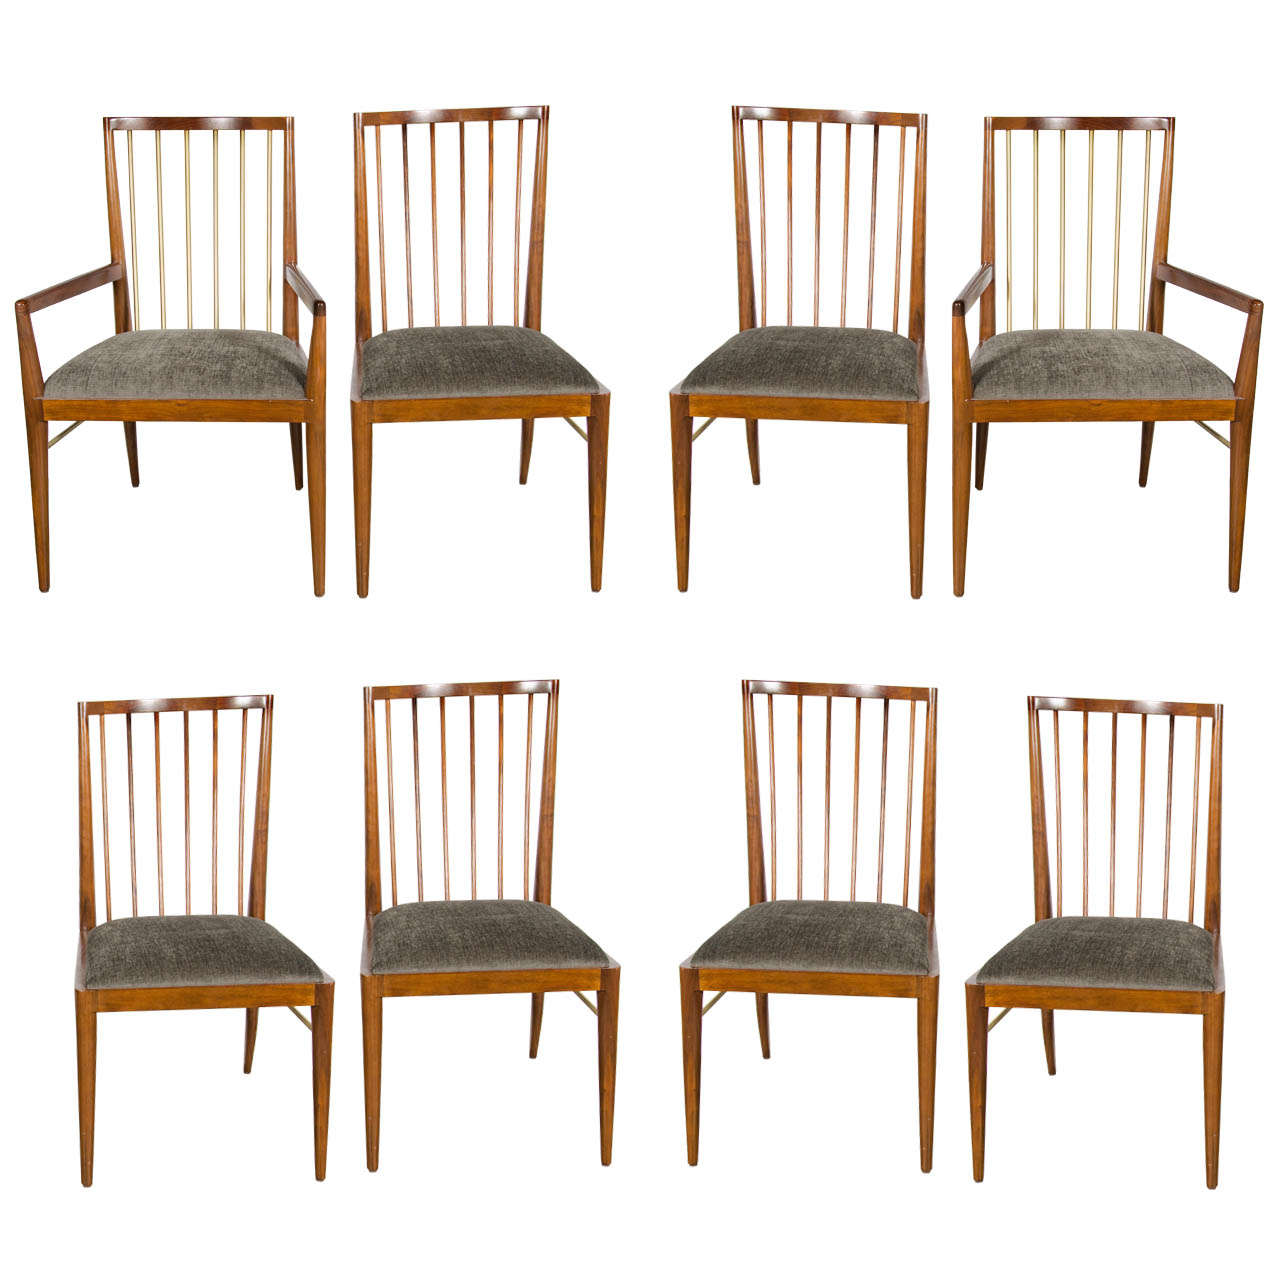 Sophisticated Set of 8 Mid-Century Style Dining Chairs in Walnut & Brass